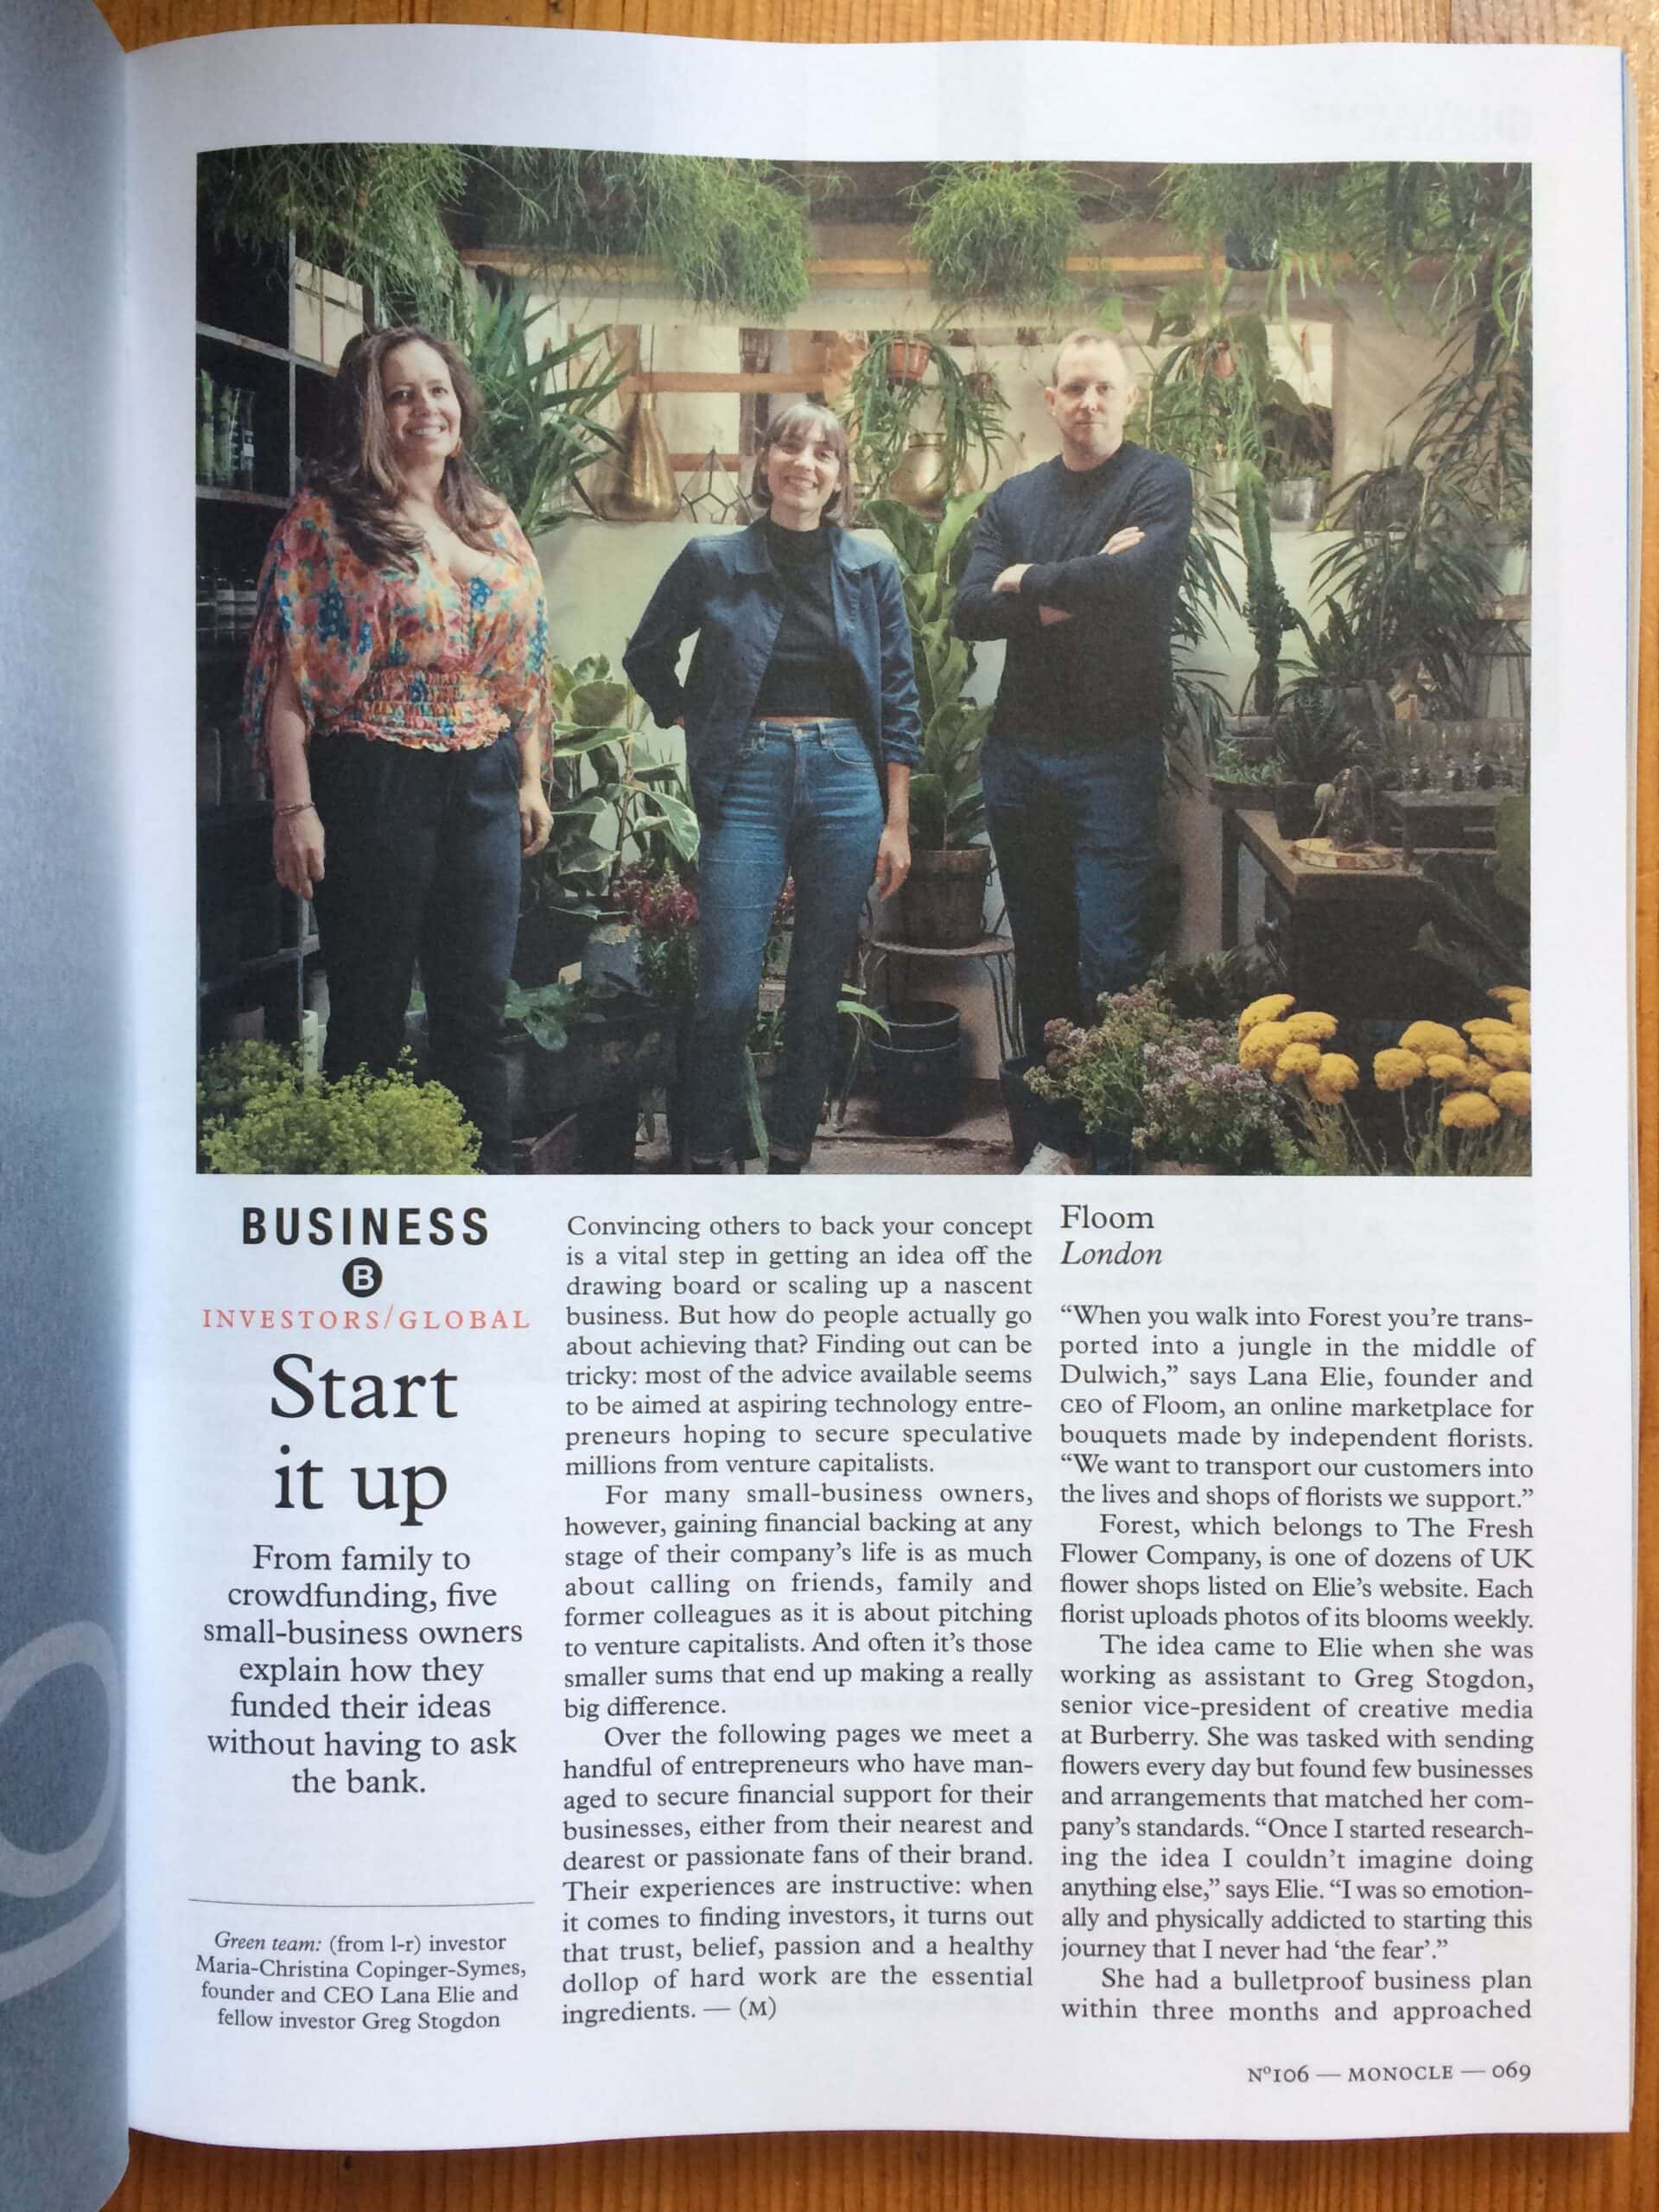 Floom founder Lana Elie photographed with investors Greg Stogdon and Maria-Christina at The Fresh Flower workshop in East Dulwich, London for Monocle magazine